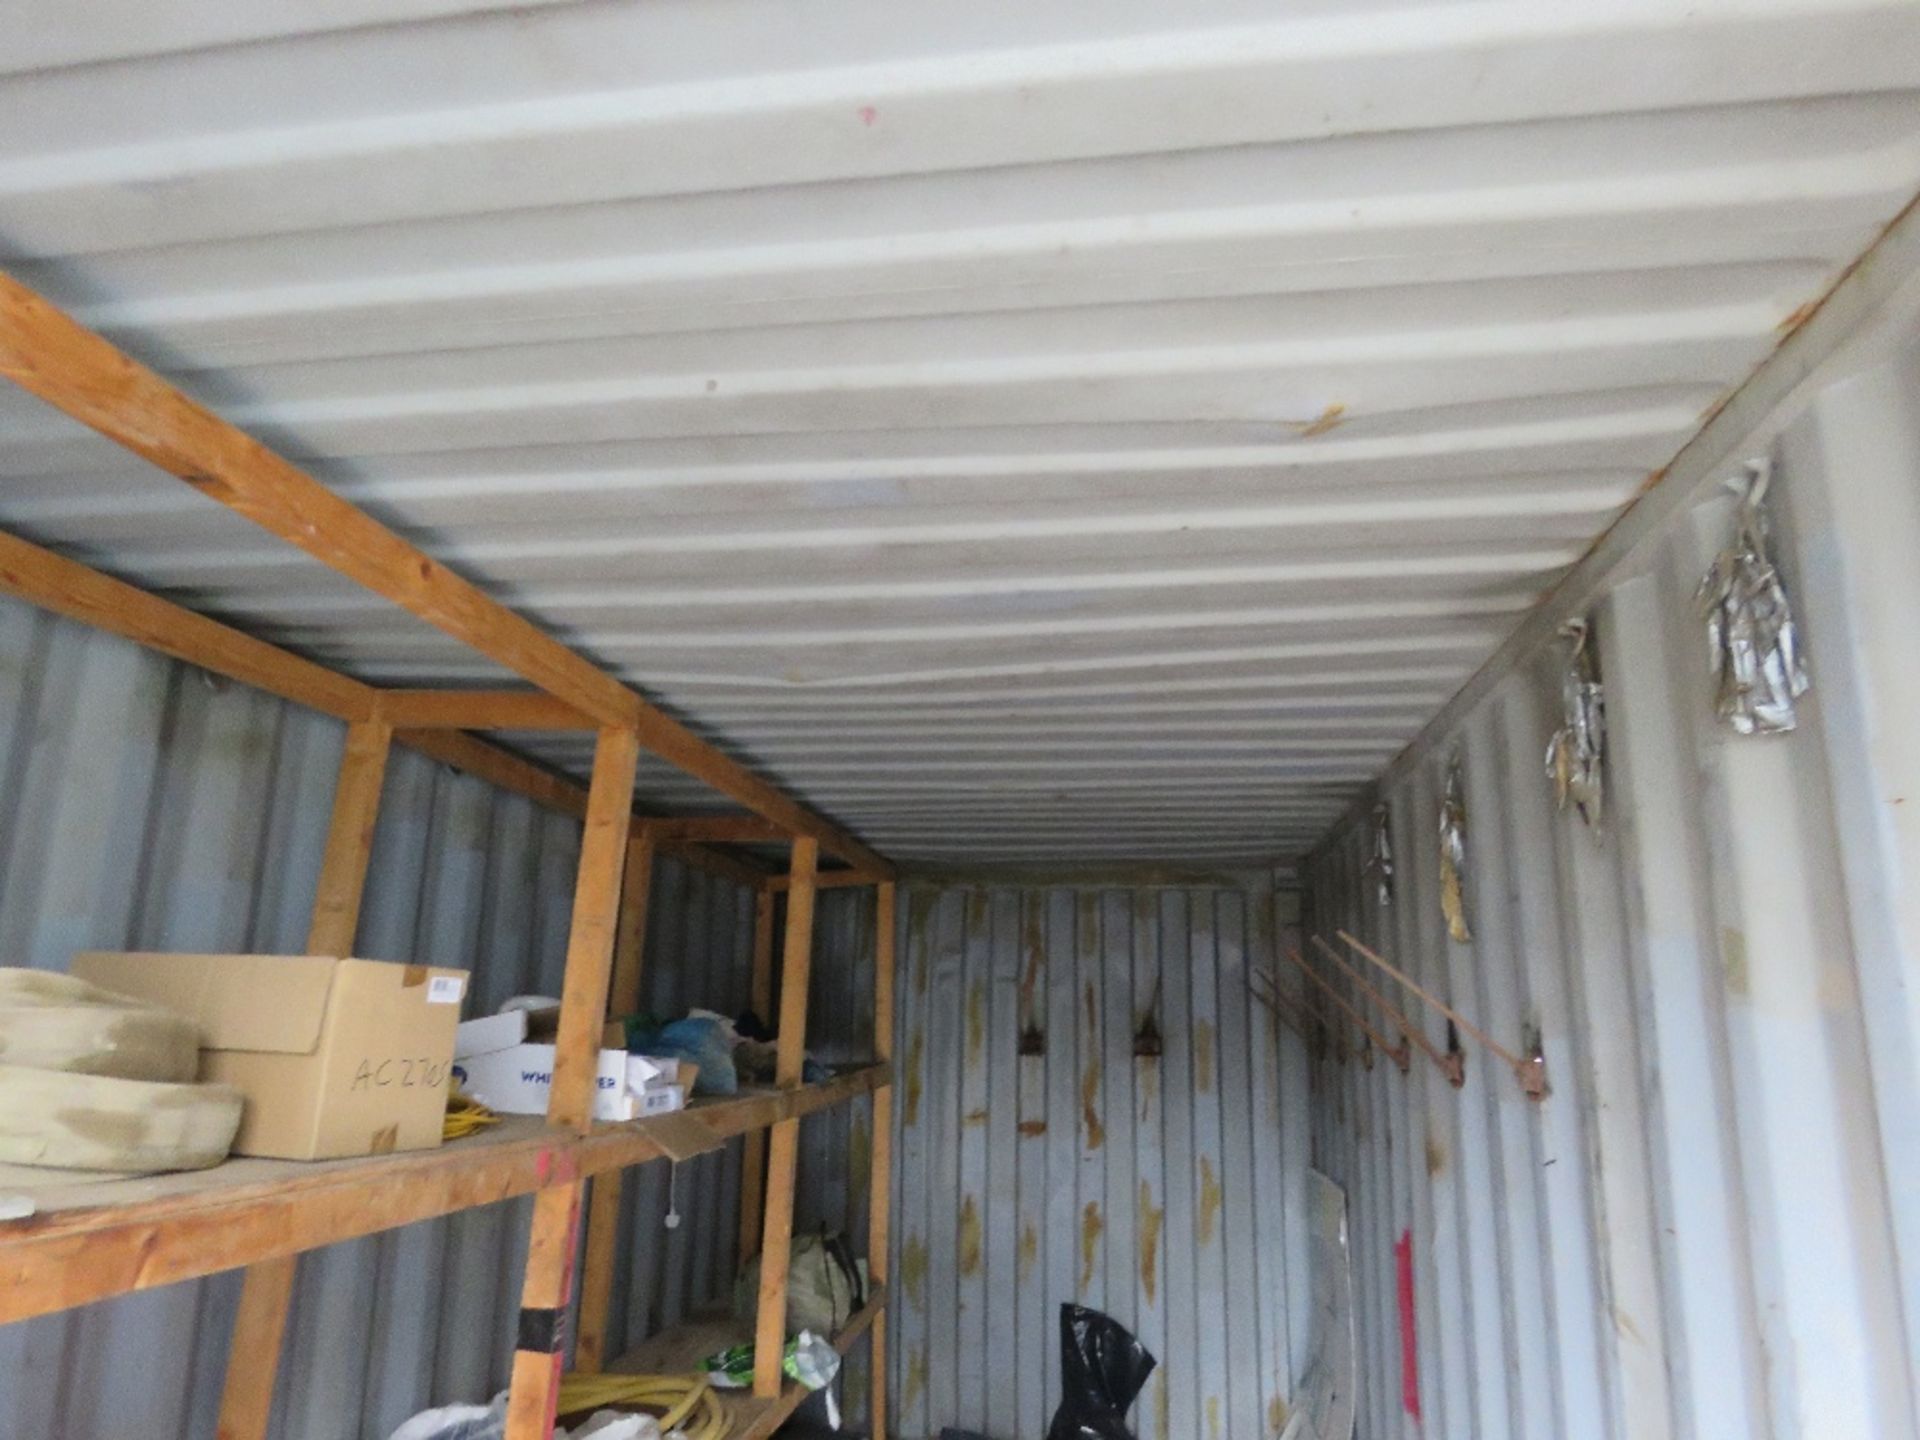 SECURE SHIPPING CONTAINER STORE 20FT LENGTH WITH SOME CONTENTS AND A RACK. . SOURCED FROM COMPANY LI - Image 5 of 7